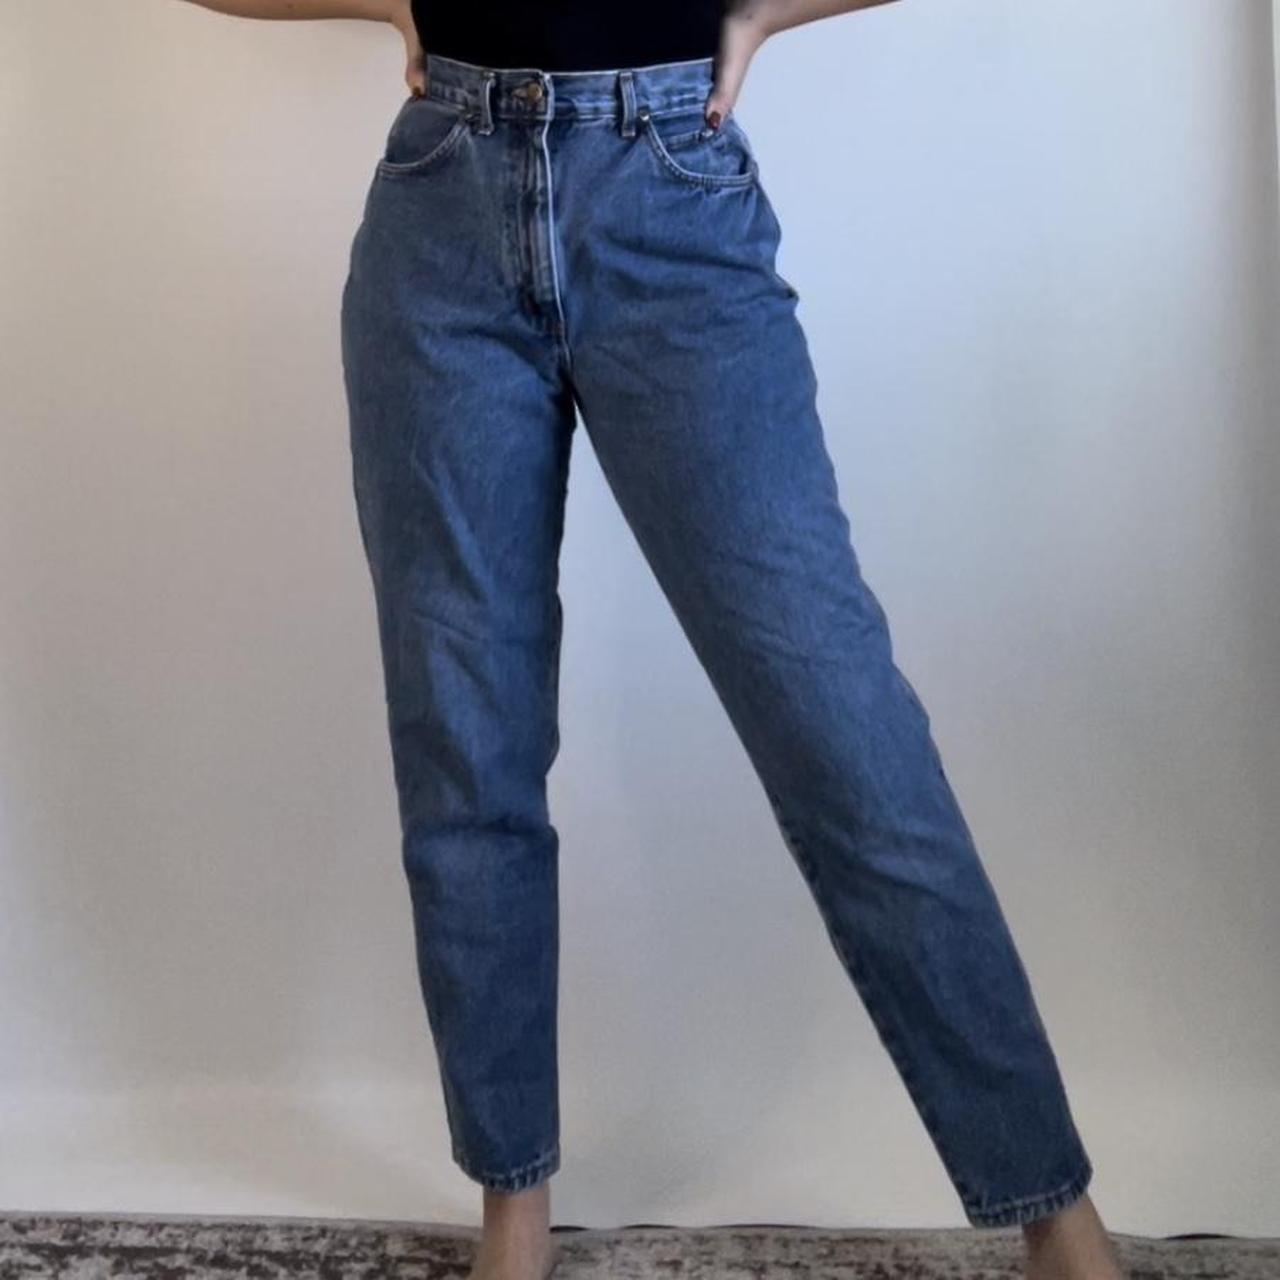 Chic Women's Blue and Navy Jeans (2)